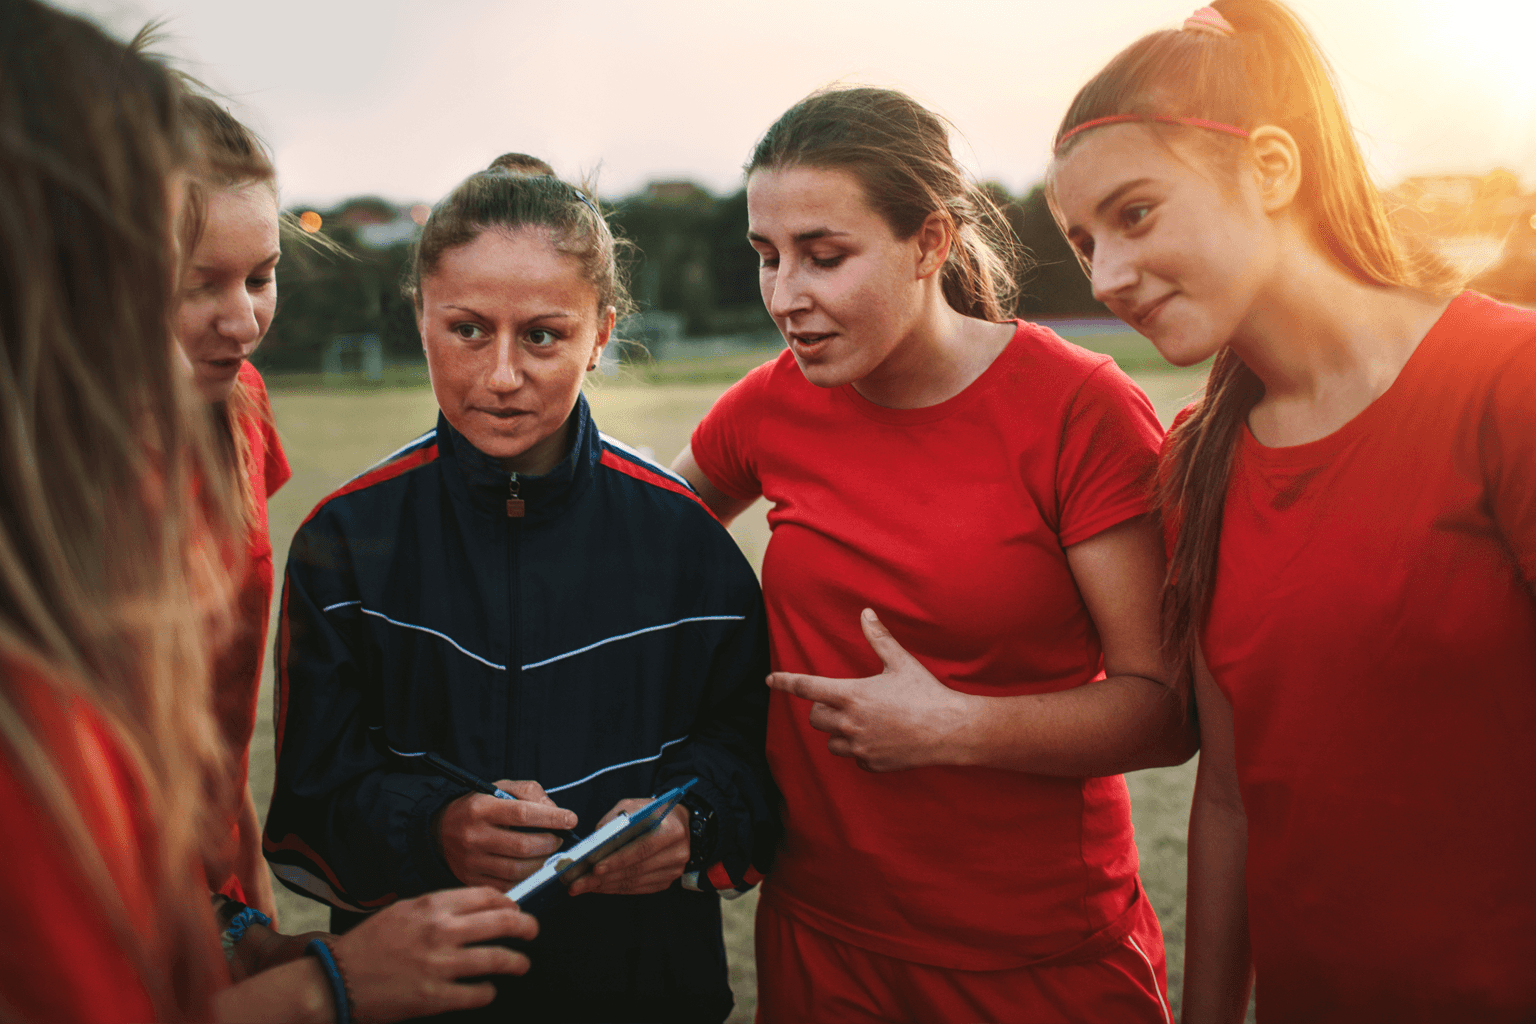 A woman holding a clipboard speaks to players in a women's sports team.